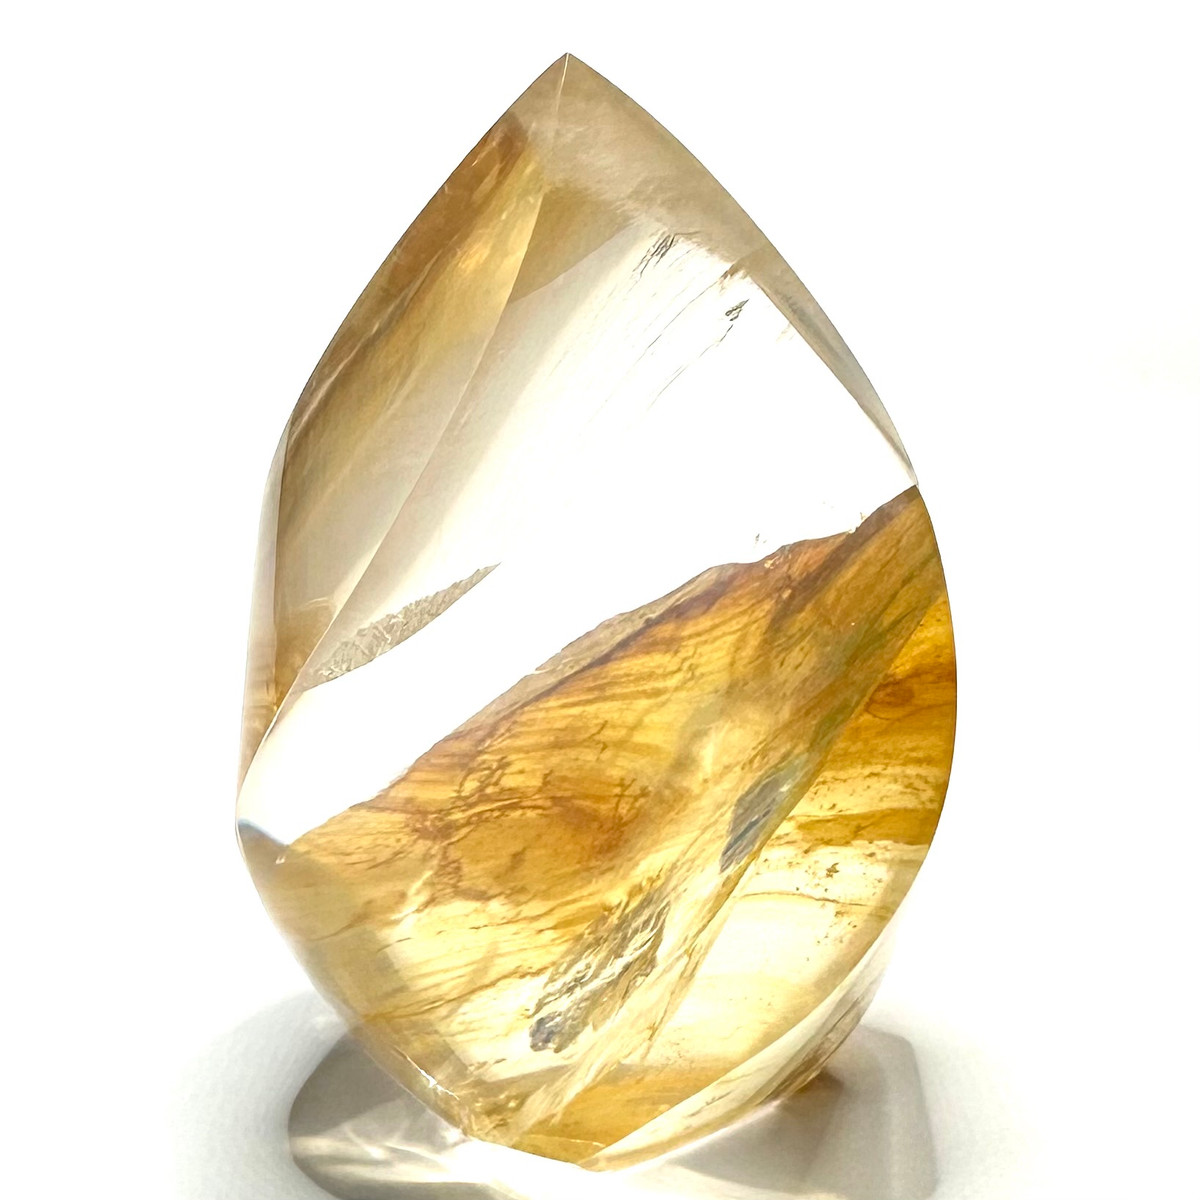 One of a Kind Girasol Quartz with Golden Healer Flame Tower-3 1/2 x 1 1/2" (NC5193)